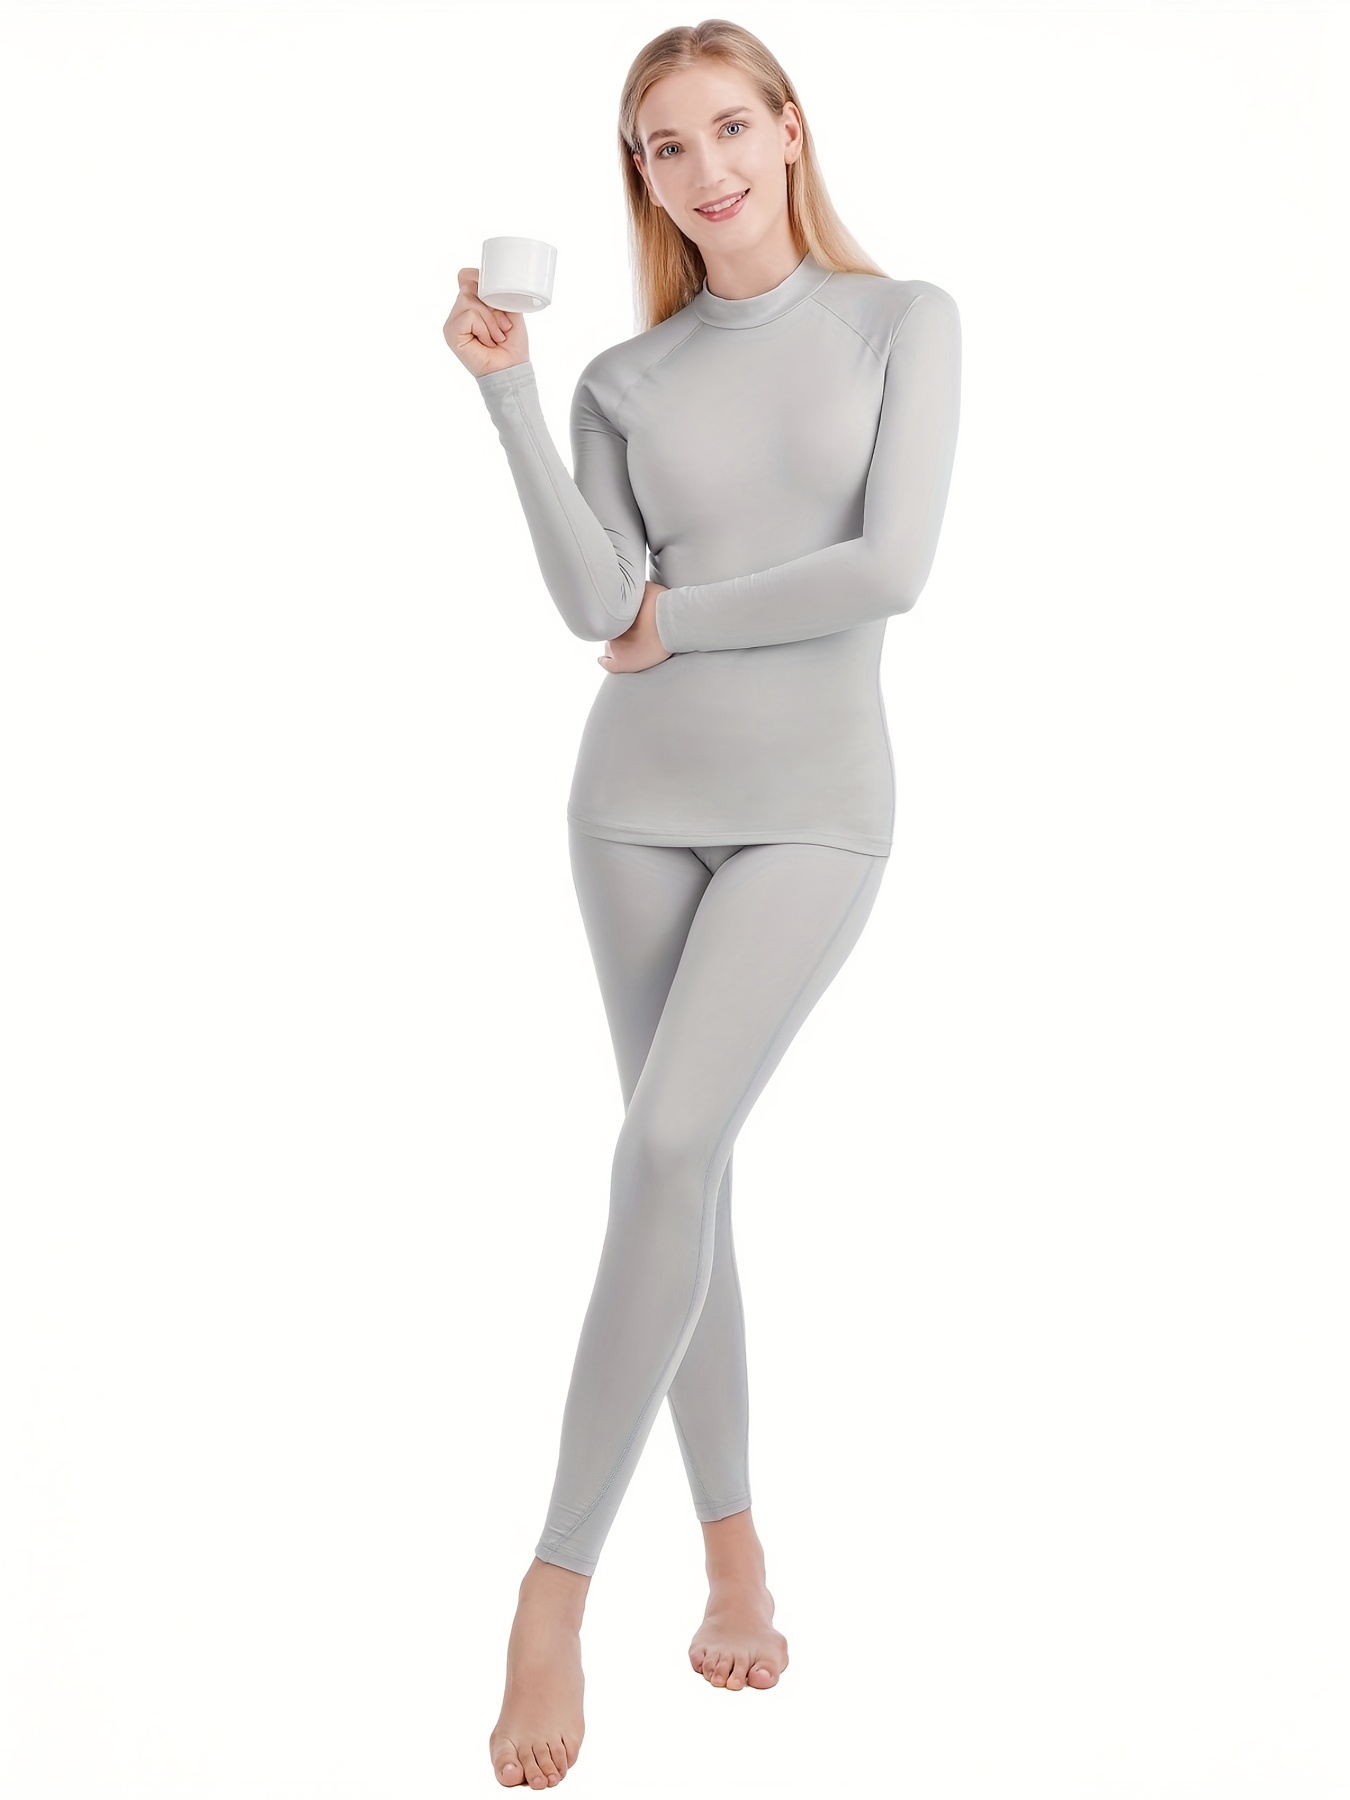 Buy Women Thermal Set, Lightweight Ultra Soft Fleece Shirt and Tights,White,X-Large  at